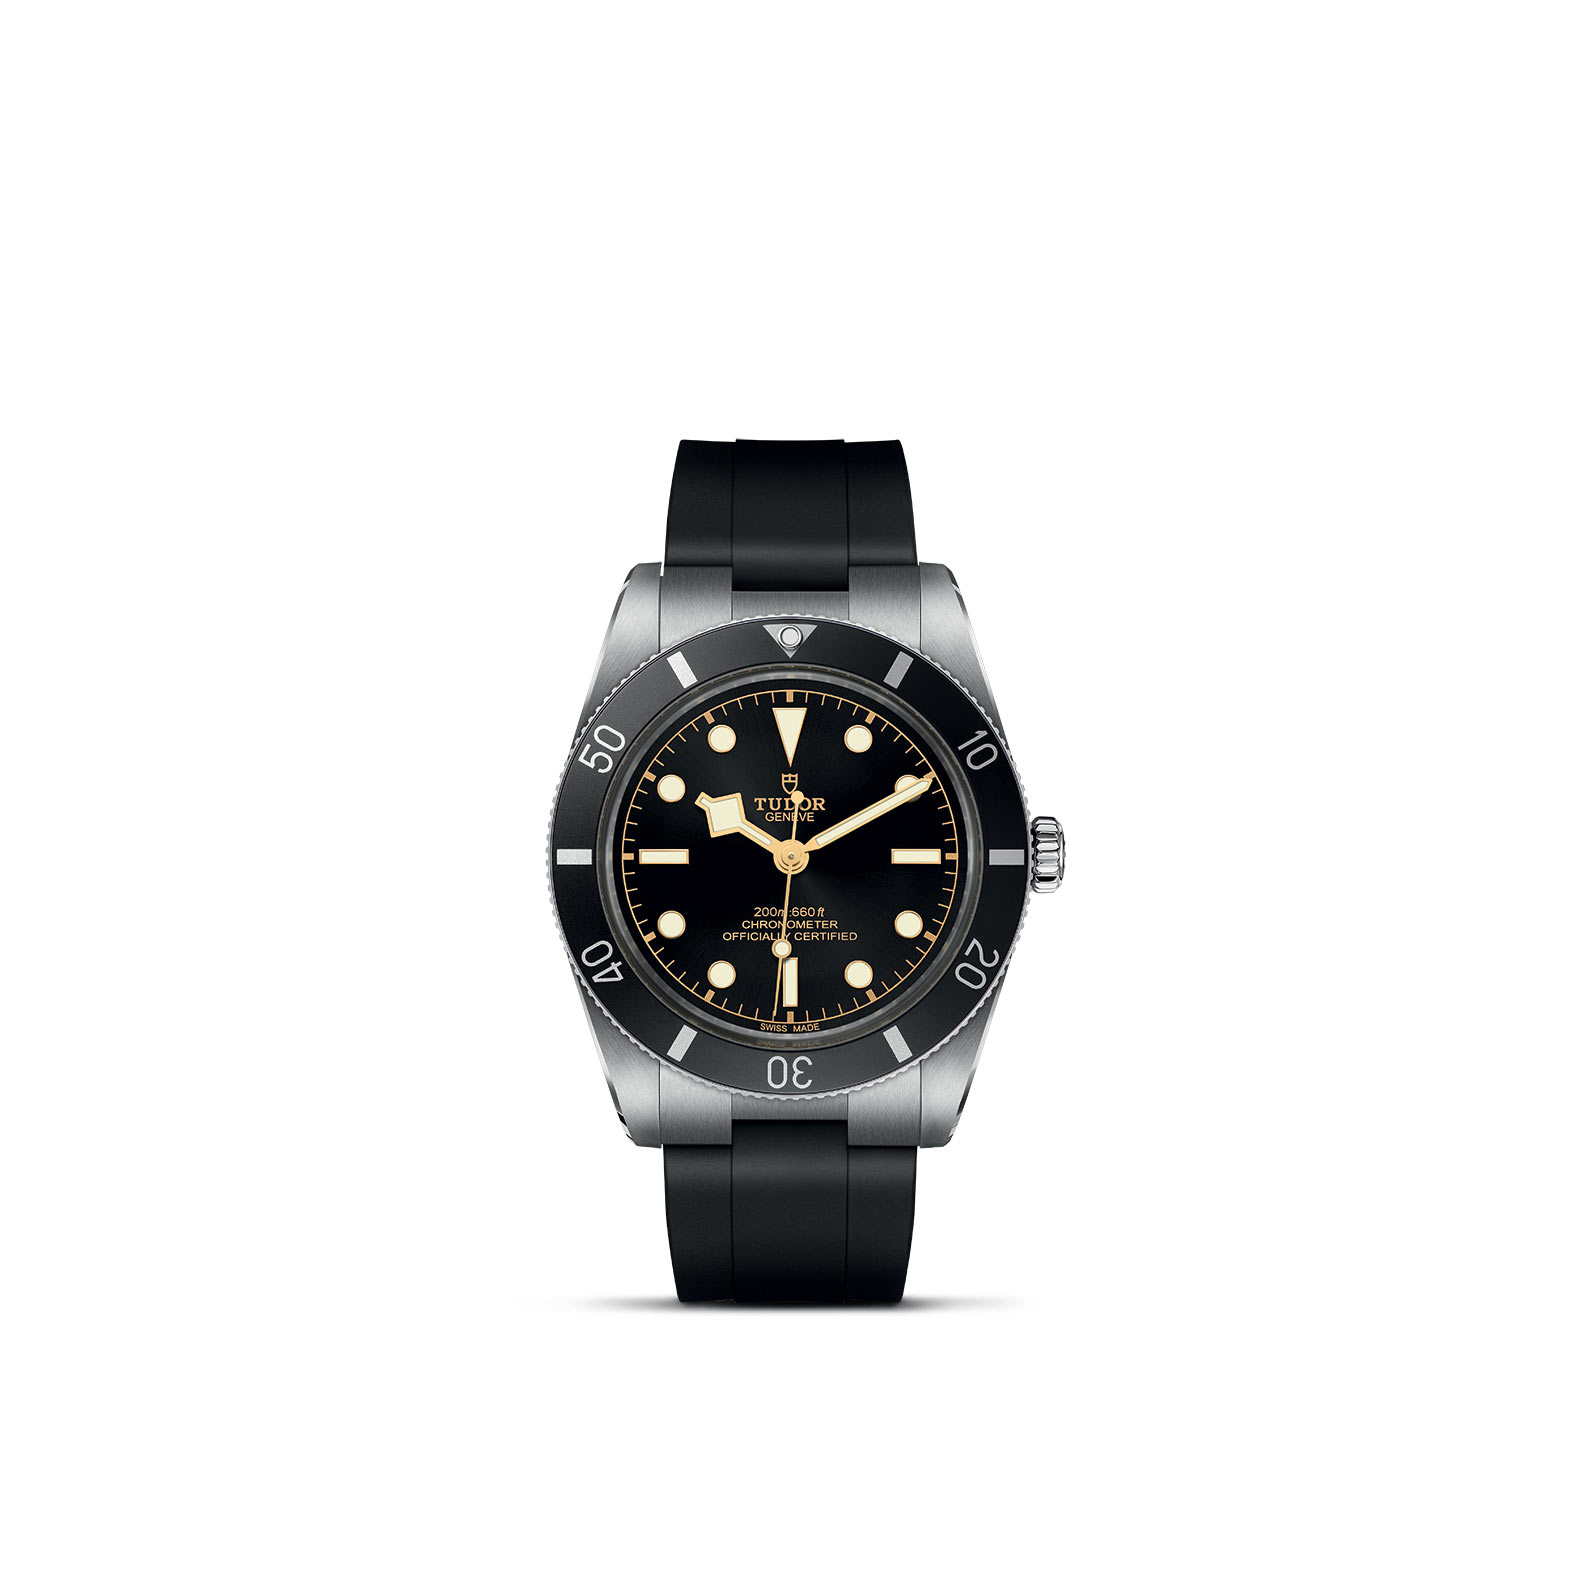 TUDOR BLACK BAY 54 standing upright, highlighting its classic design against a white background.